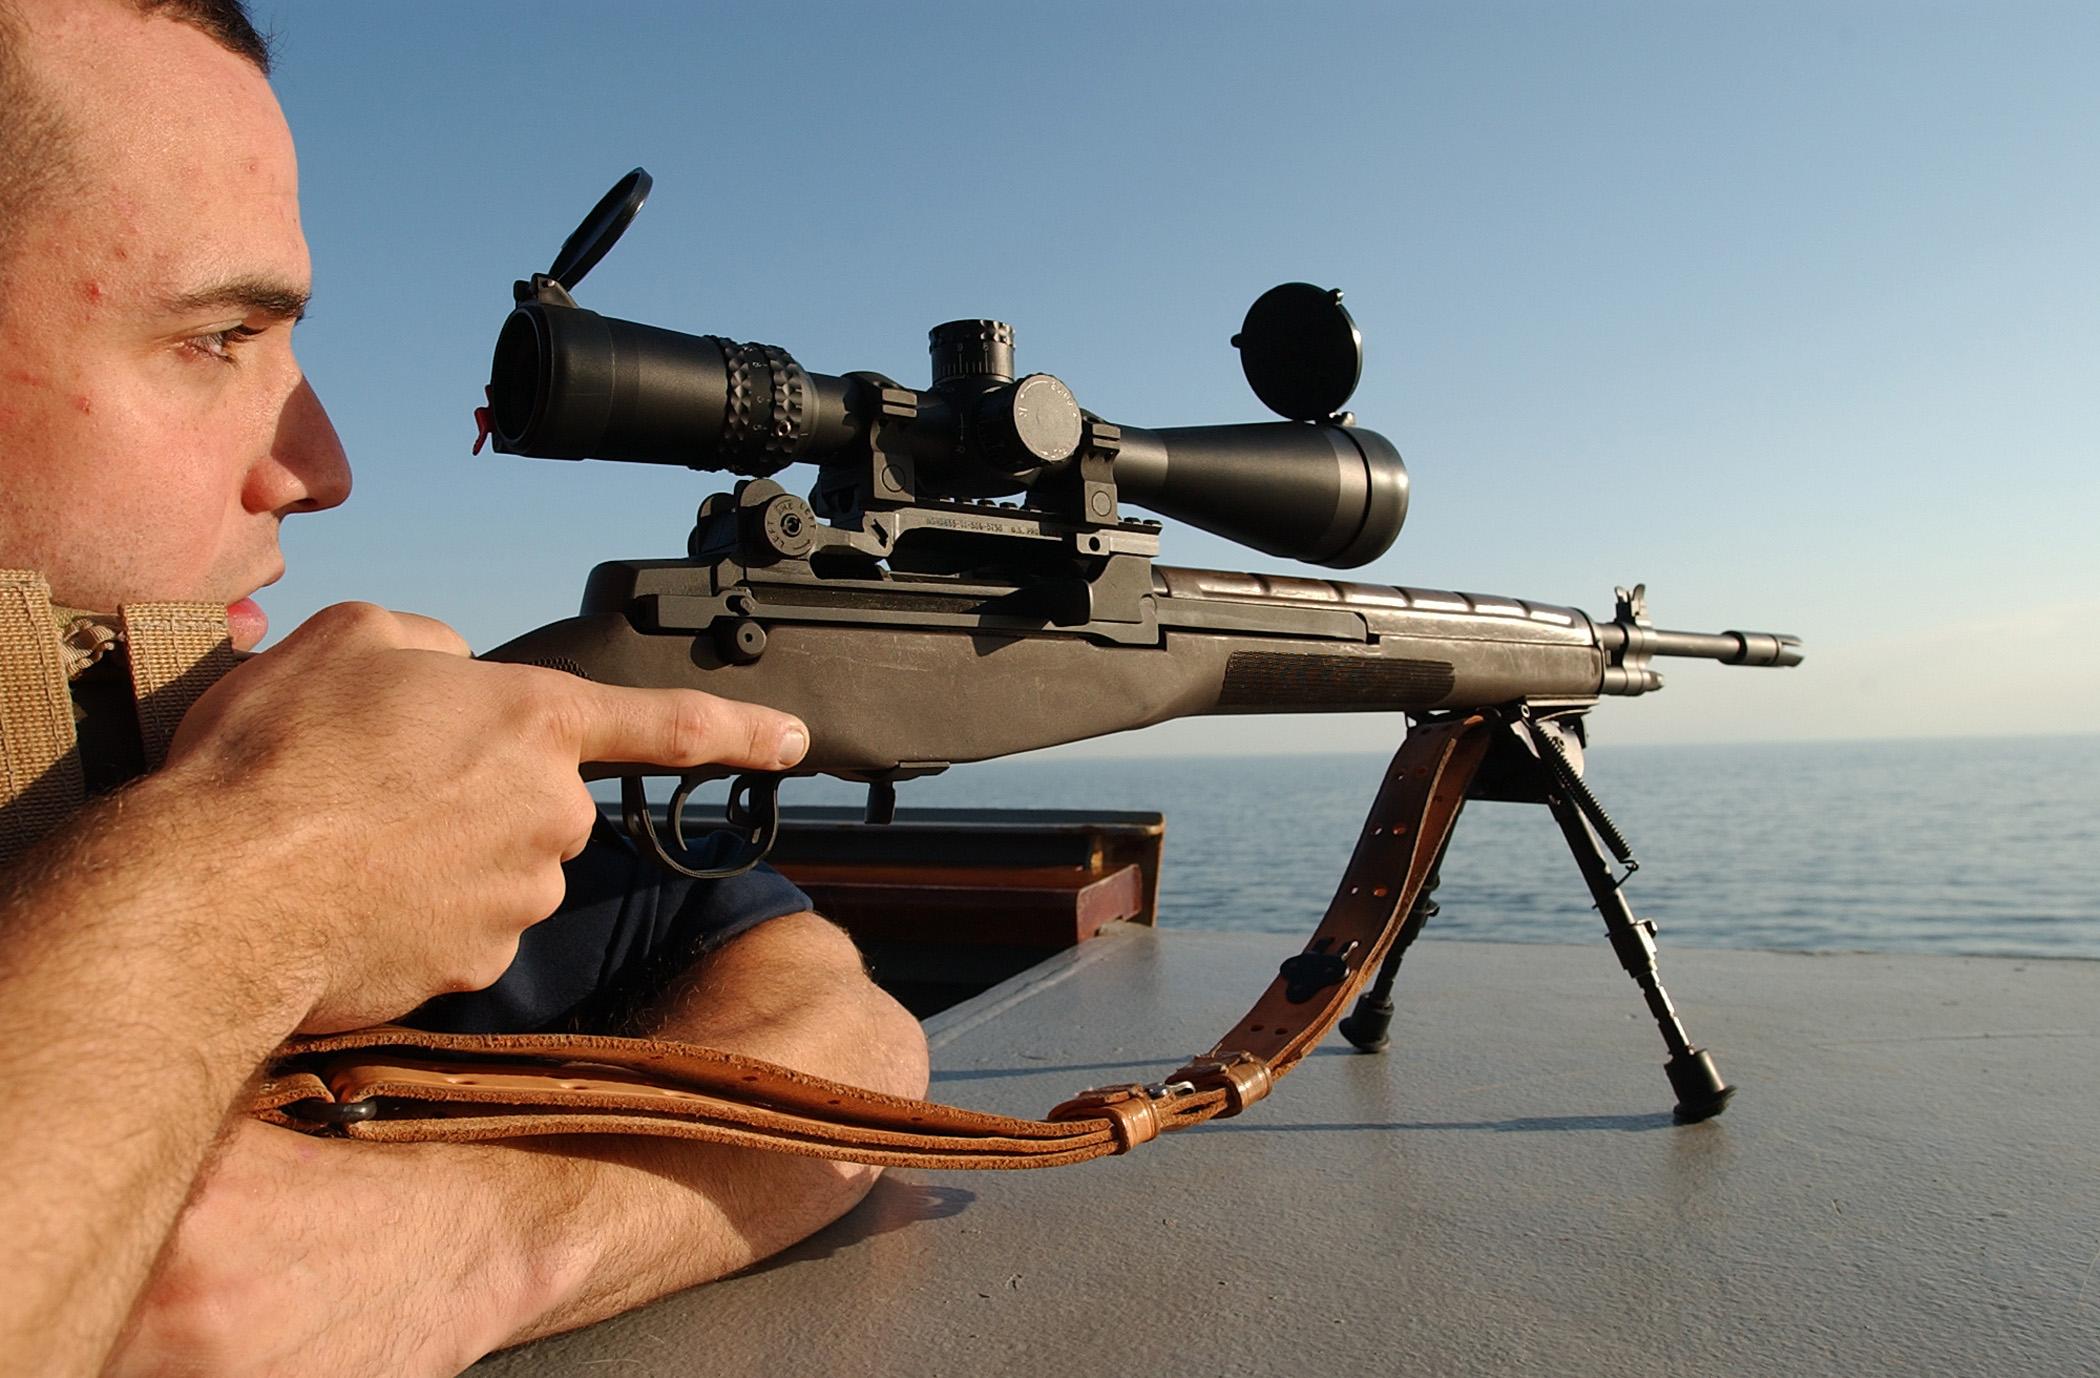 Ensign Jeremy M. Smith, a communications officer assigned to the guided-missile destroyer USS Mahan (DDG 72), takes aim with an M-14 sniper rifle.